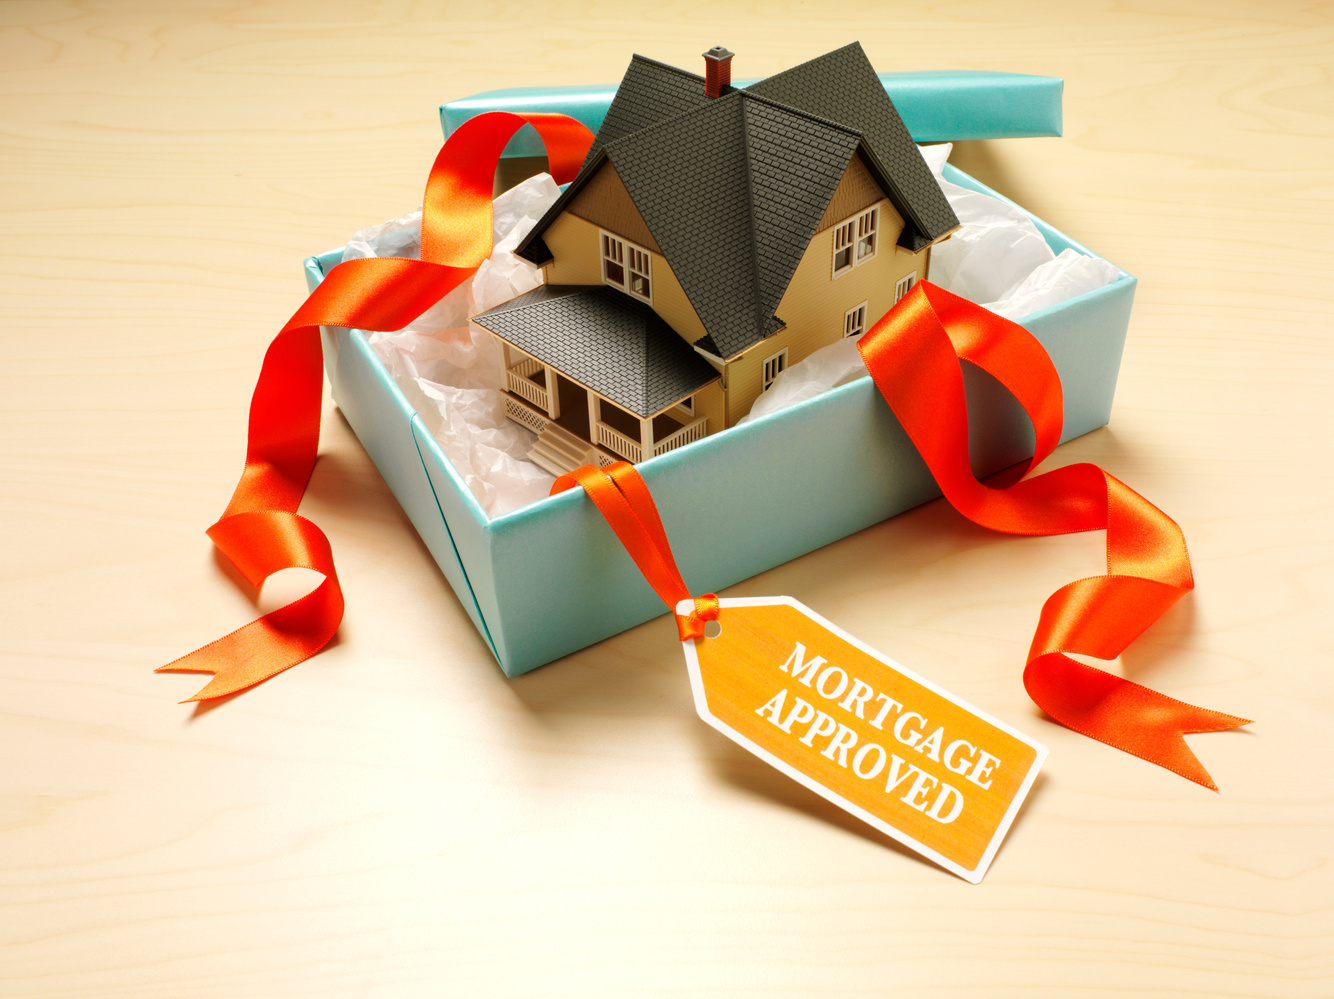 Mortgage Approved Label on a Unwrapped House Gift